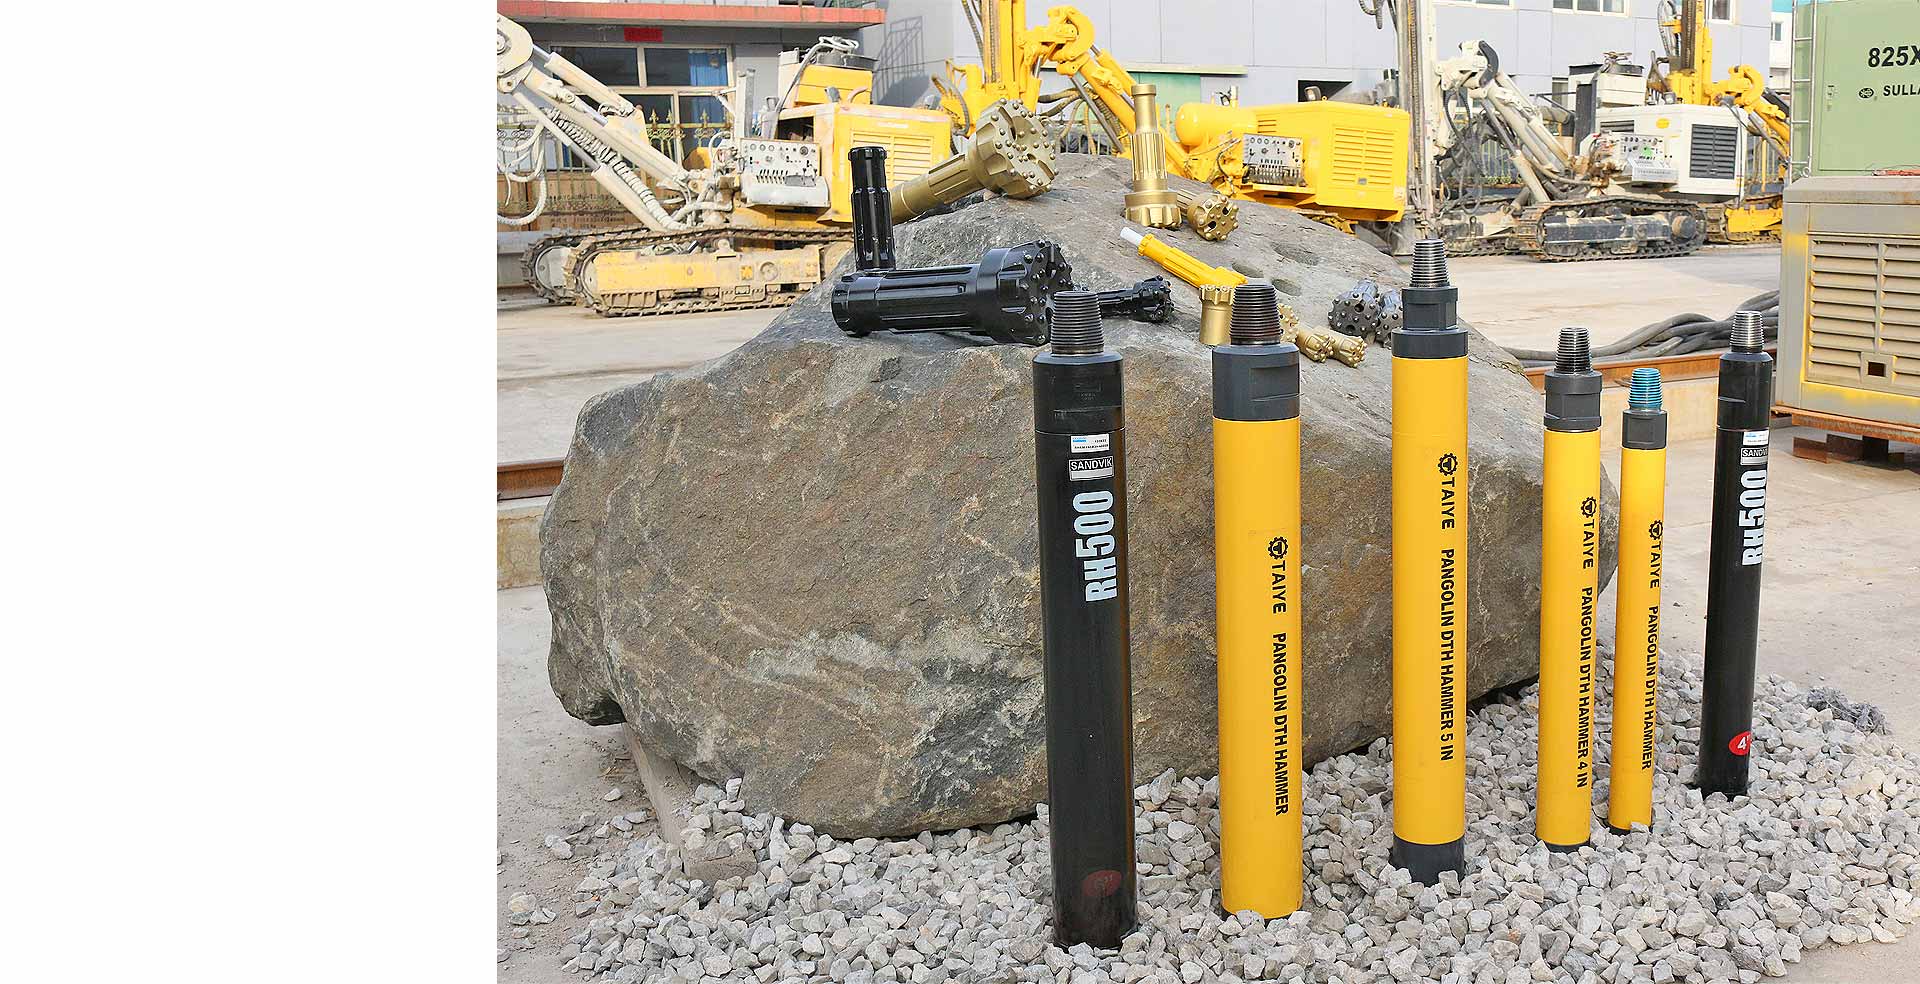 Types Of Pneumatic Hammers For Drill Rig